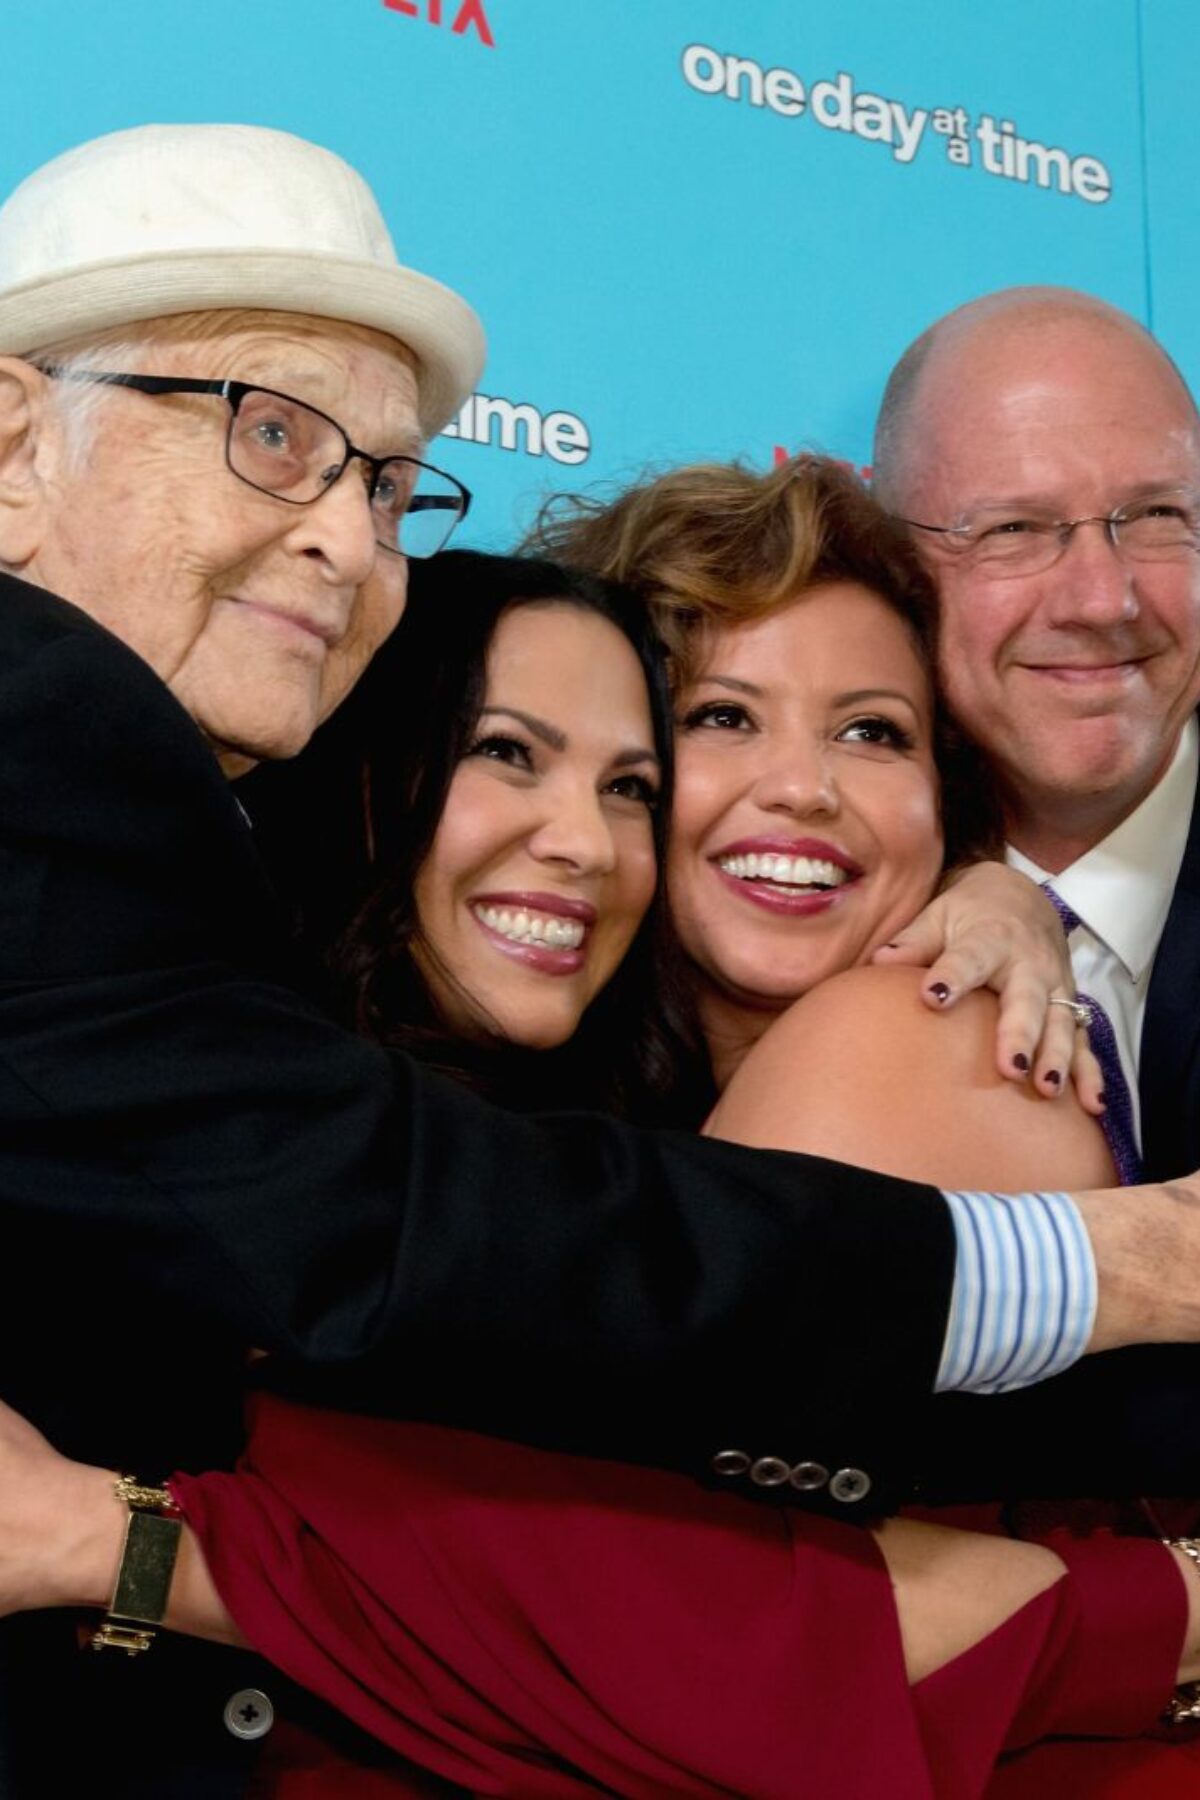 WEST HOLLYWOOD, CA - DECEMBER 14: (L-R) Executive producers Norman Lear and Gloria Calderon Kellett, actress Justina Machado and executive producer Mike Royce arrive for the Premiere Of Netflix's 